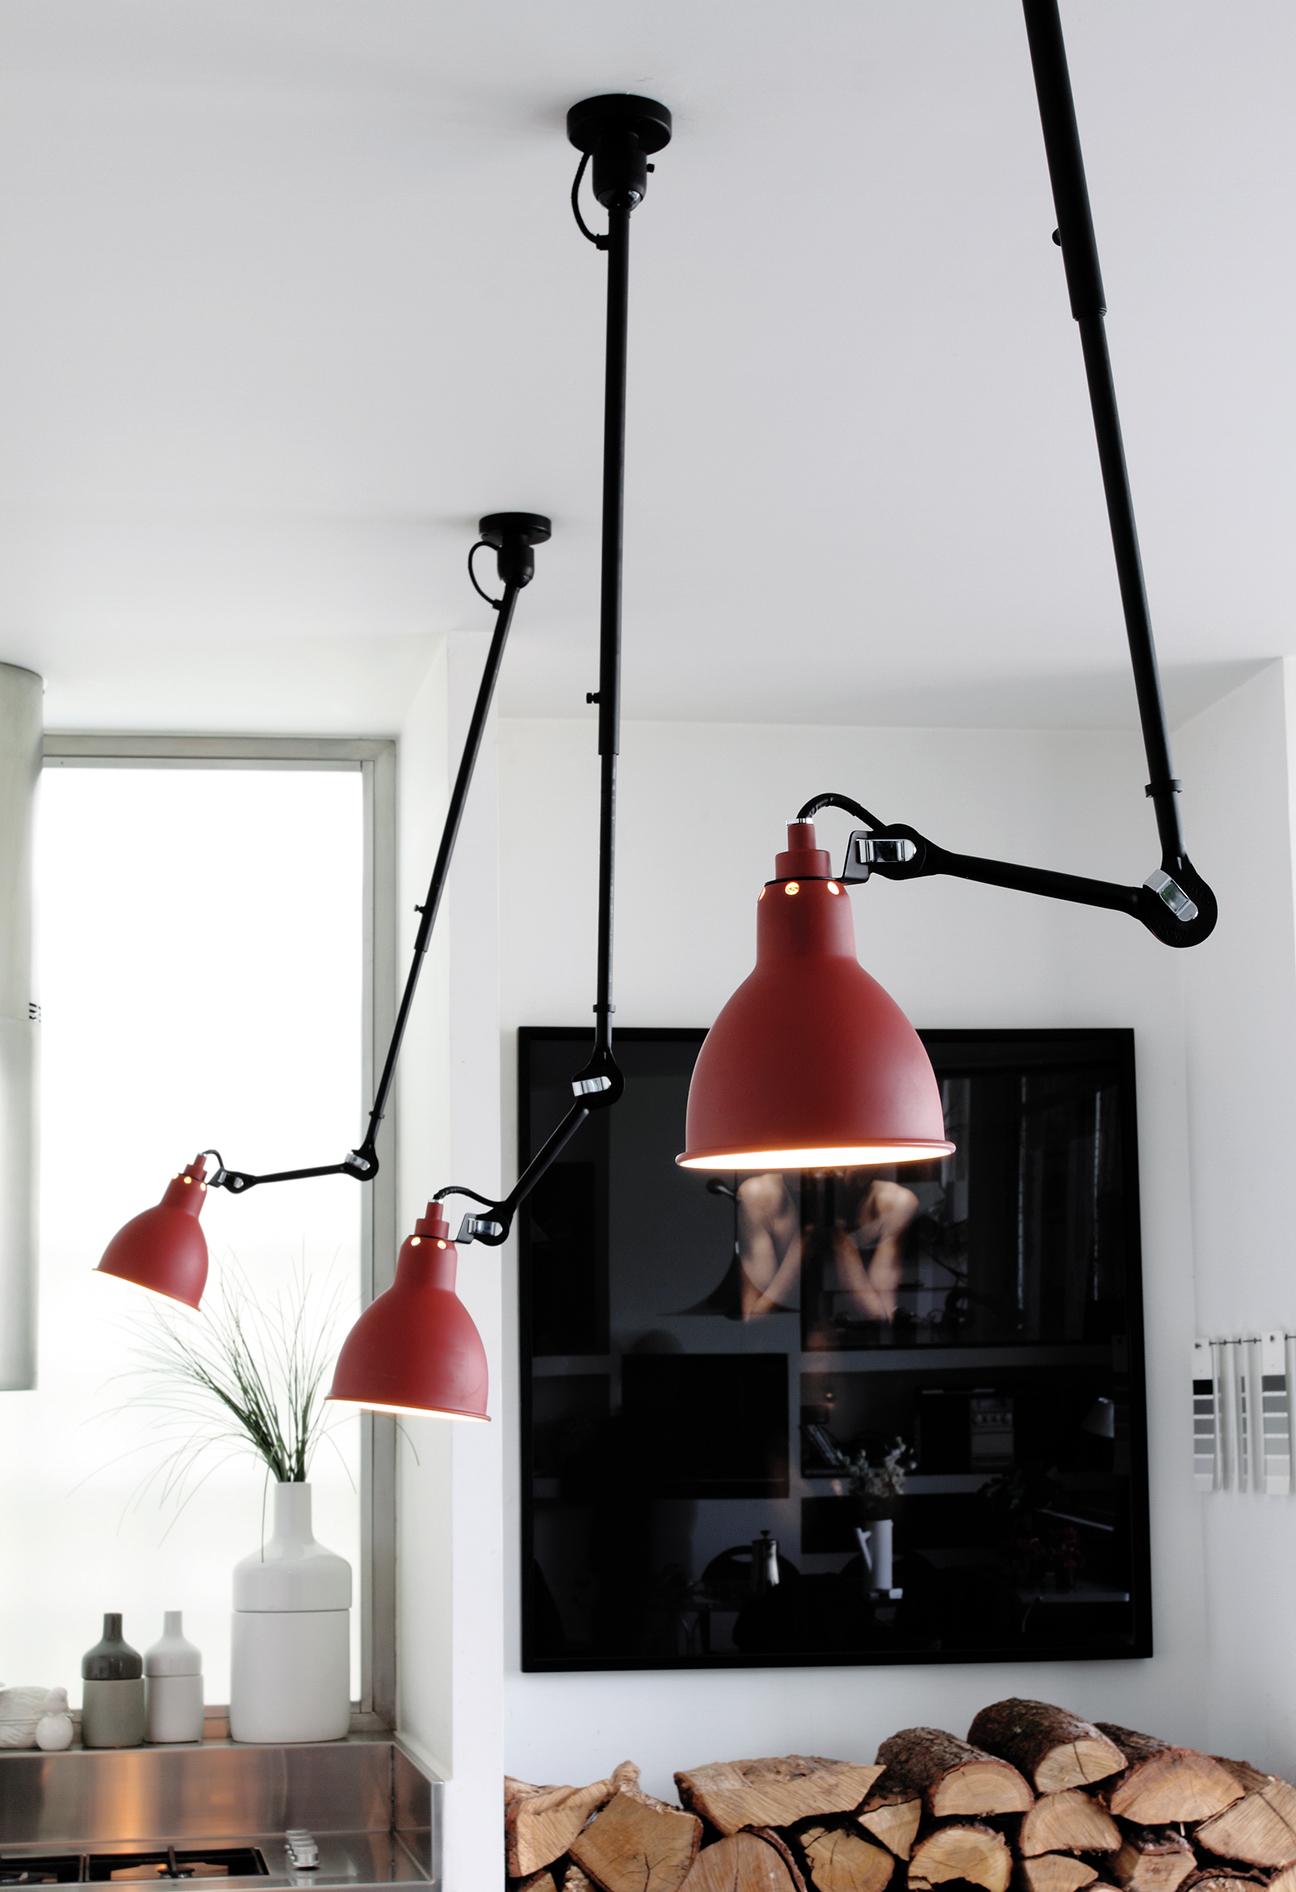 Steel DCW Editions La Lampe Gras N°302 Pendant Light in Black Arm and Chrome Shade For Sale